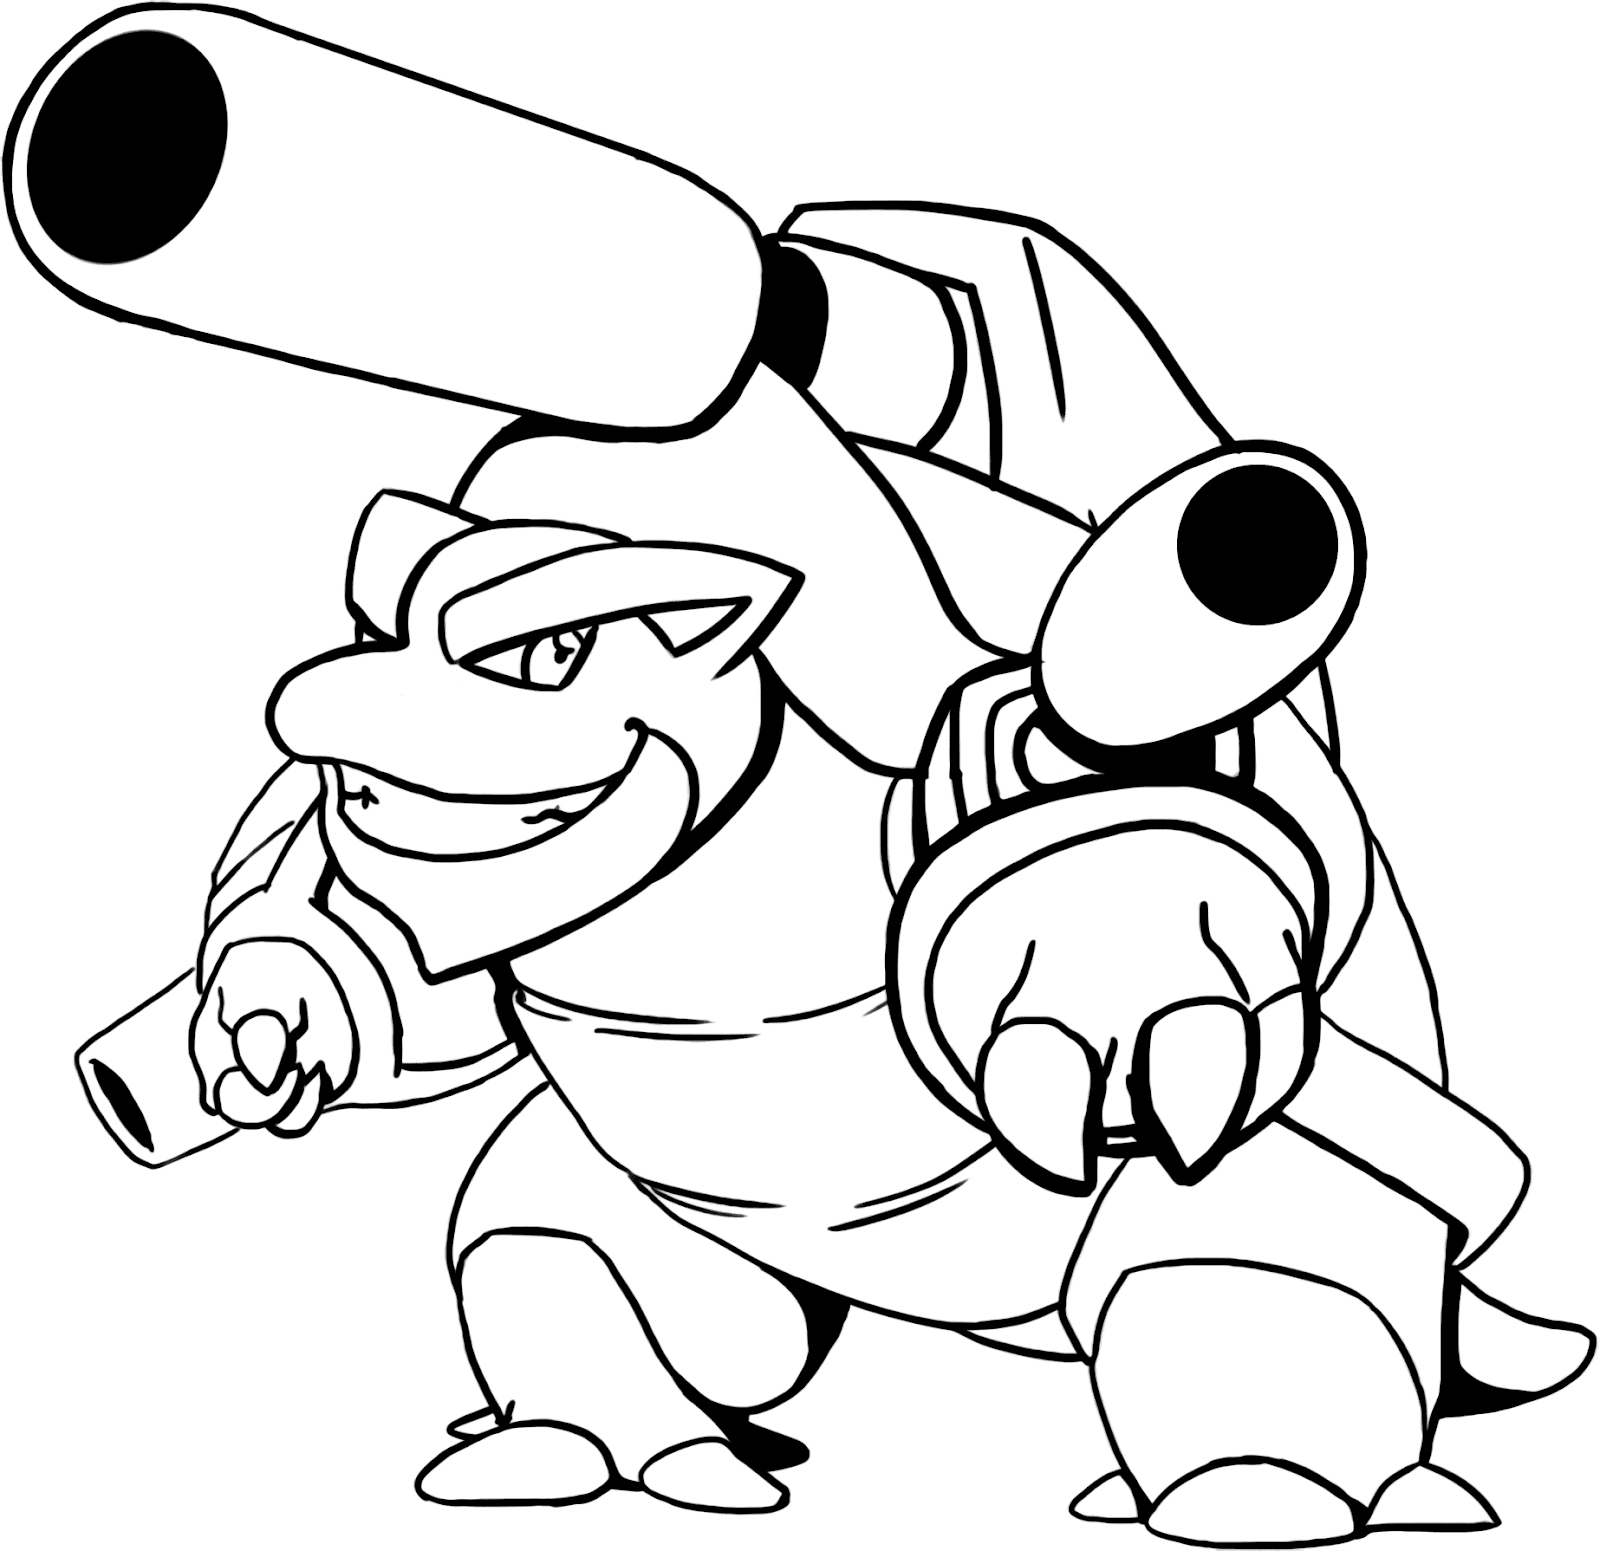 Download Free Blastoise Coloring Pages Collection - Free Pokemon Coloring Pages